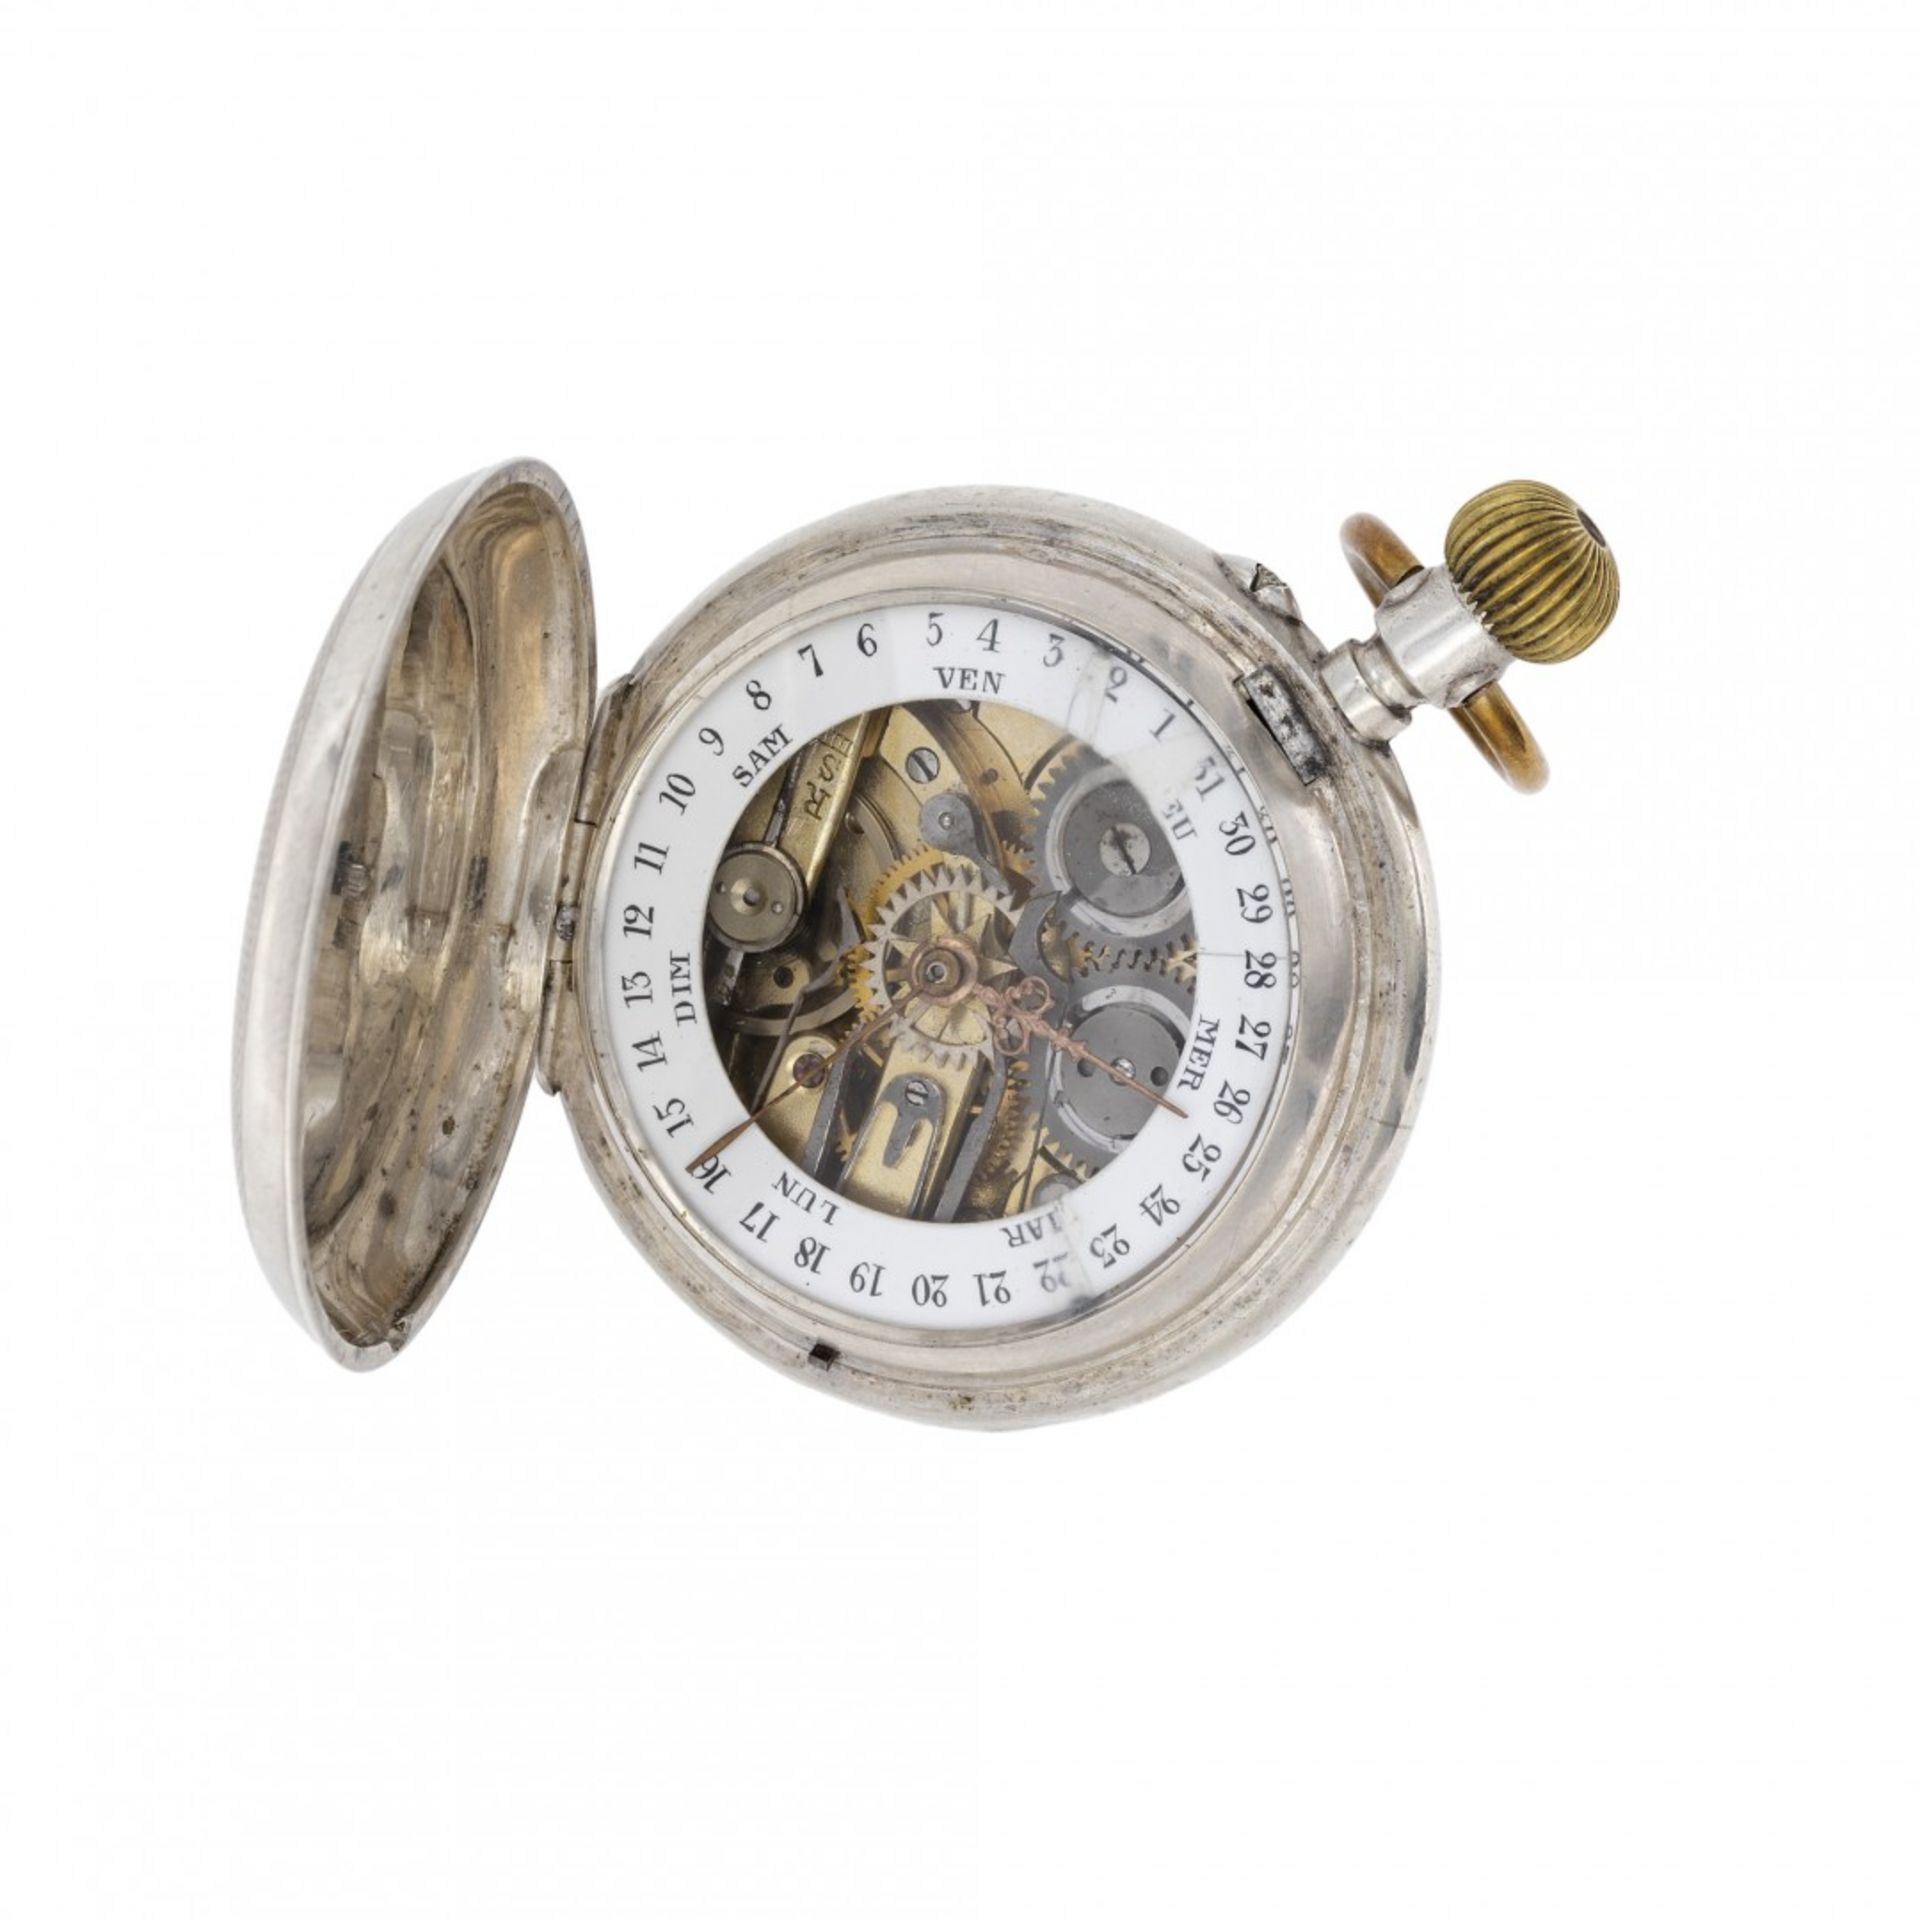 DOUBLE FACE SILVER WATCH WITH CALENDAR AND 24-HOUR DIAL, CIRCA 1880 - Image 2 of 3